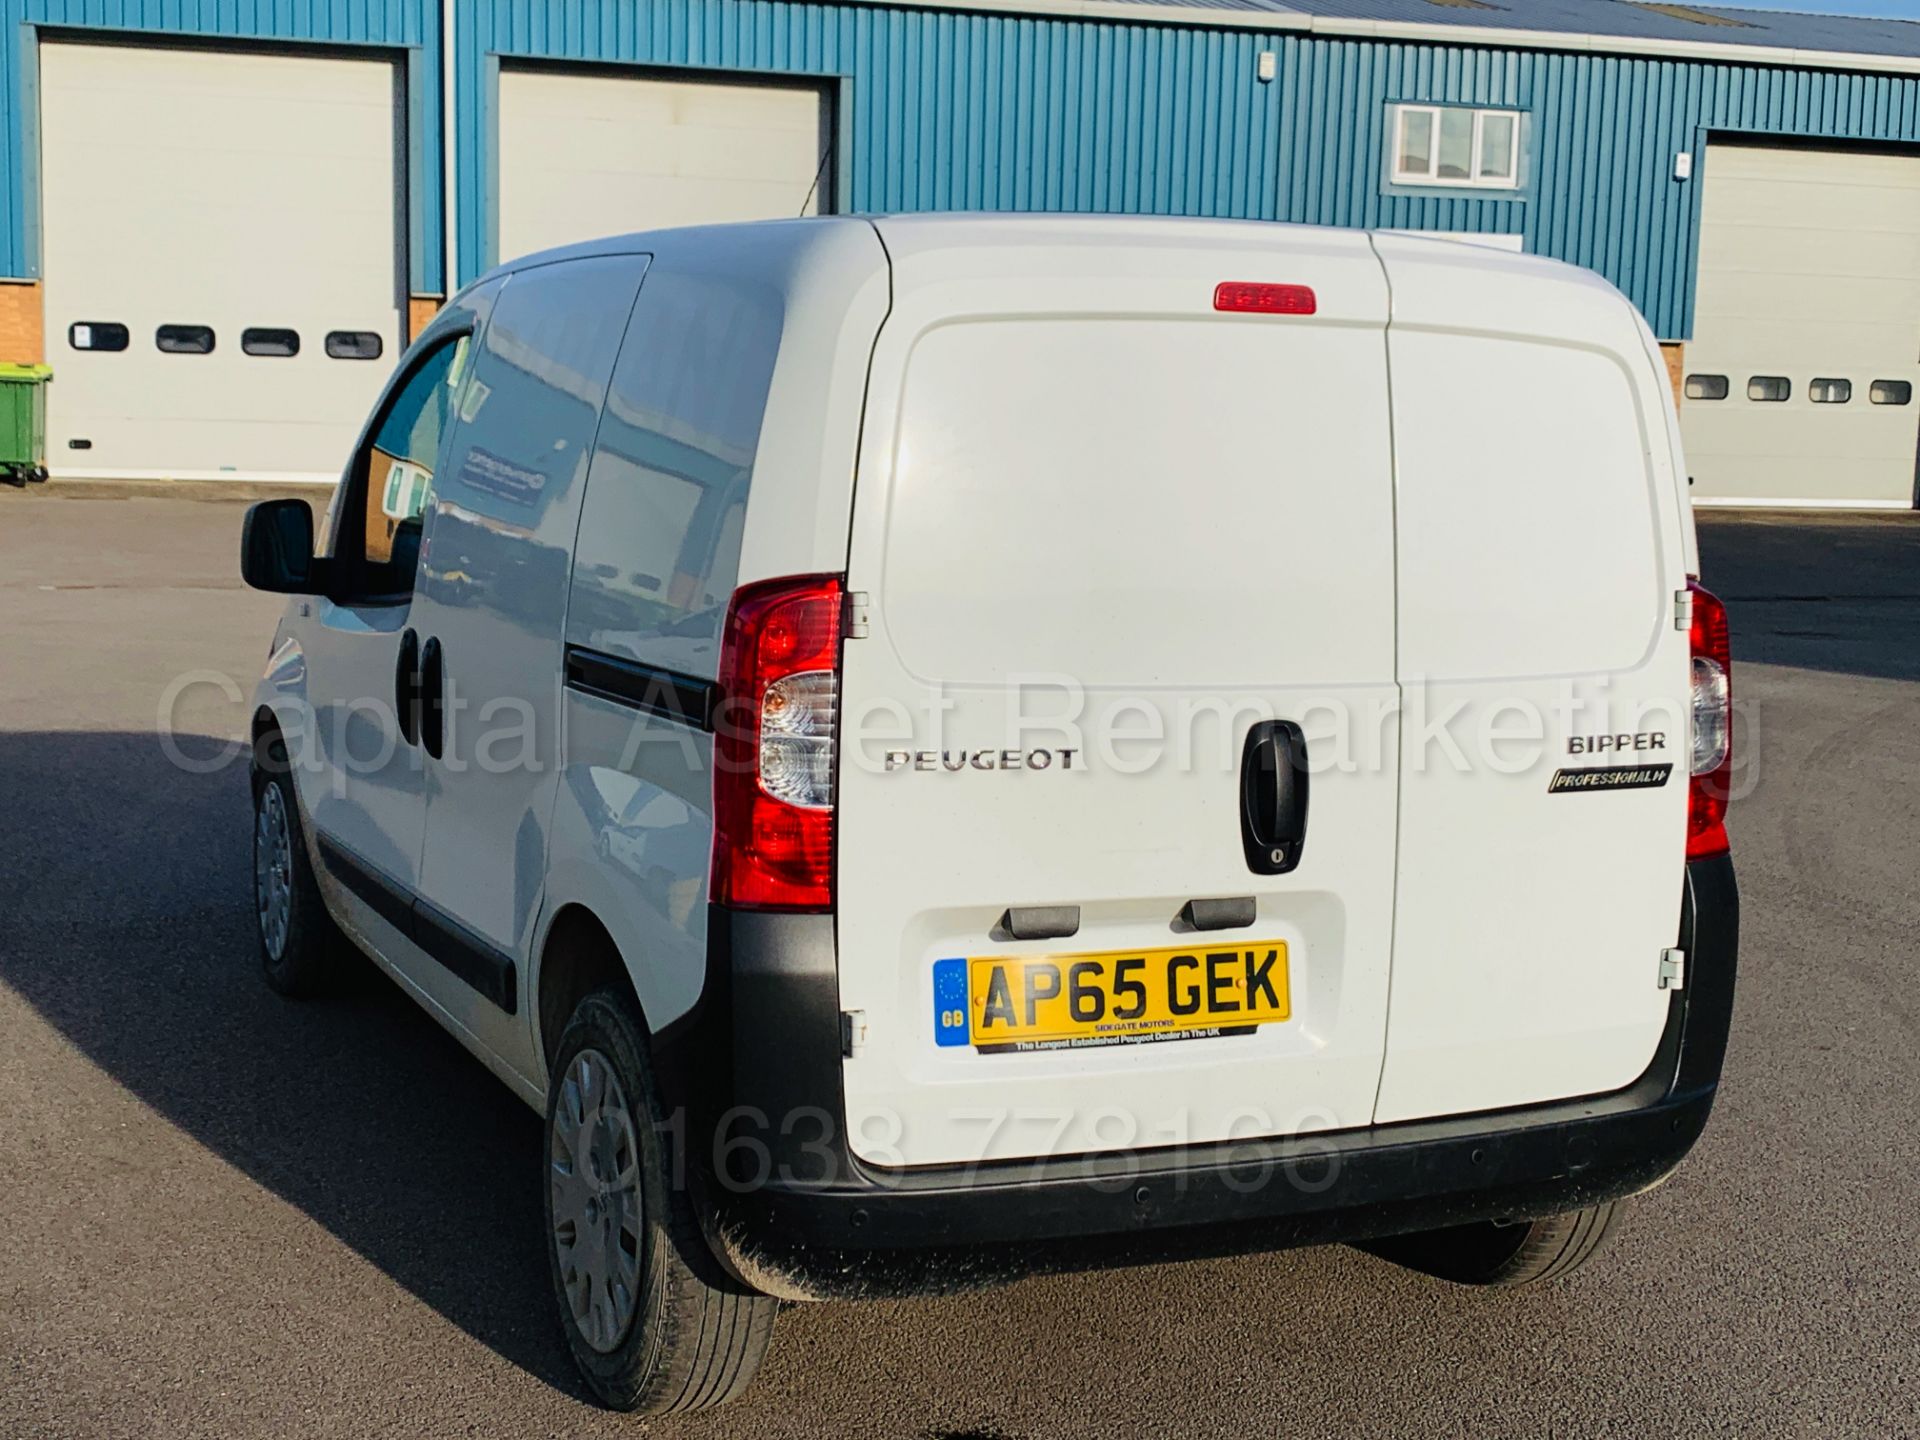 (On Sale) PEUGEOT BIPPER *PROFESSIONAL* LCV - PANEL VAN (65 REG) 'HDI - 5 SPEED' (1 OWNER) *AIR CON* - Image 8 of 36